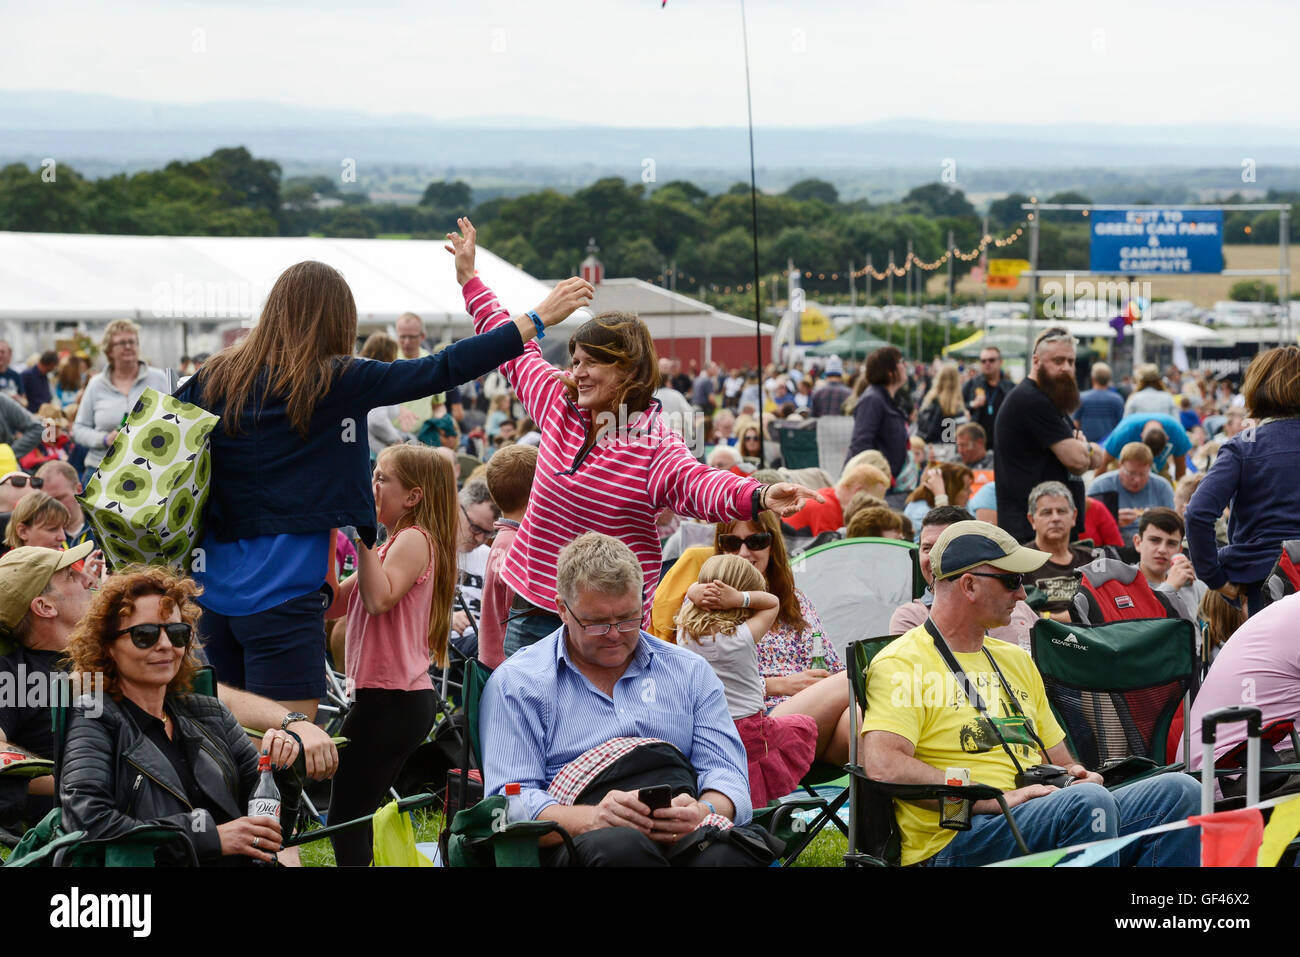 Bolesworth, Cheshire, UK. 29th July 2016. Fans waiting for Texas to come to the Main stage. The event is the brainchild of Chris Evans and features 3 days of cars, music and entertainment with profits being donated to the charity Children in Need. Credit:  Andrew Paterson/Alamy Live News Stock Photo